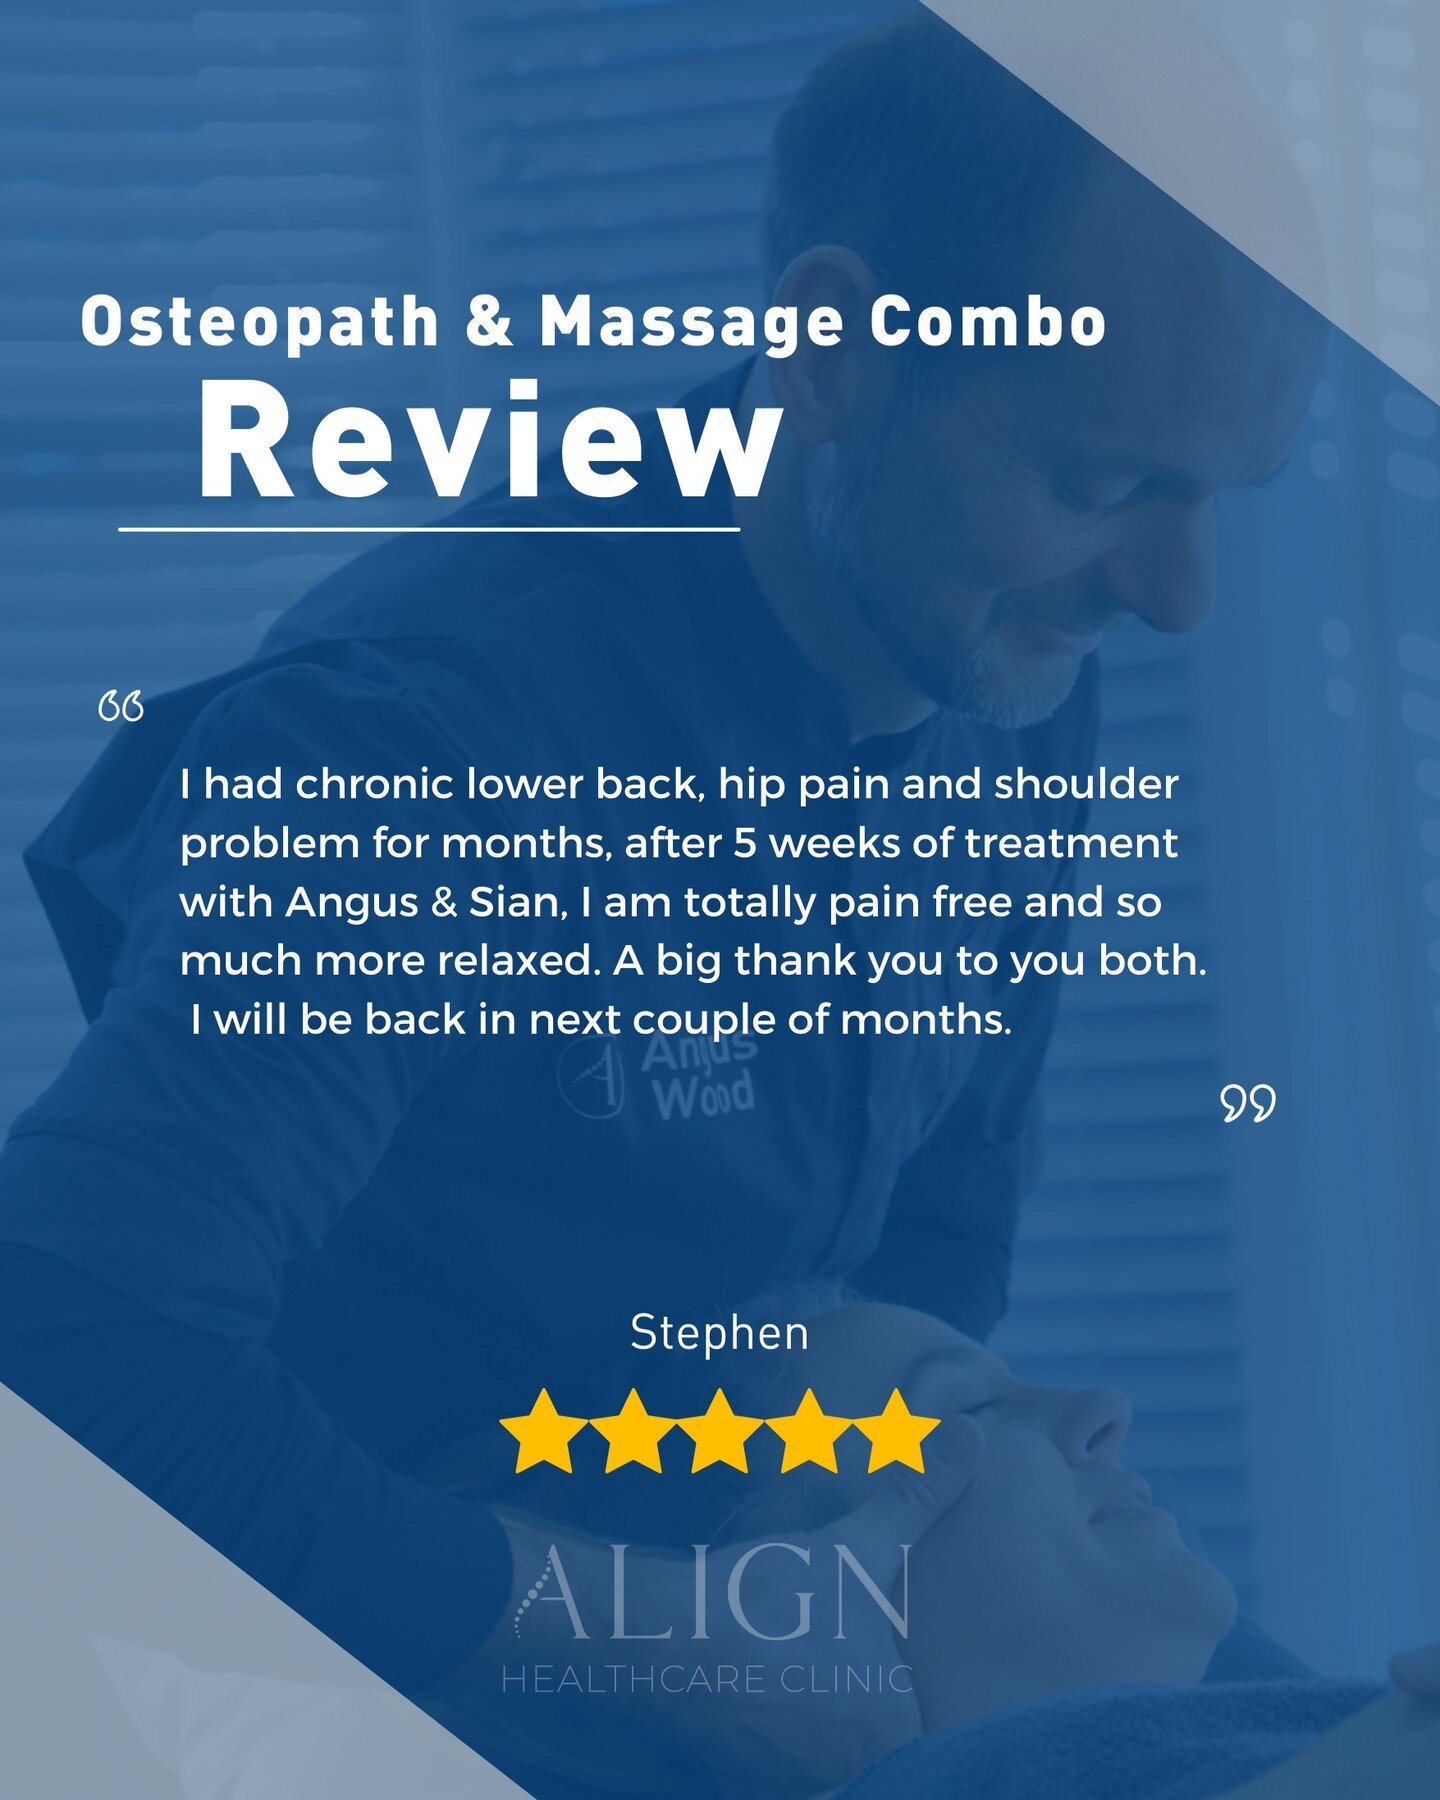 Osteopathy &amp; Massage combination treatment review - as always, thank you.

#bootlehealthcare #liverpoolhealthcare #healthcareclinic #wellnessclinic
#AlignHealthcareClinic #holistichealth #painrelief #manualtherapy #podiatrylife #podiatry #musculo